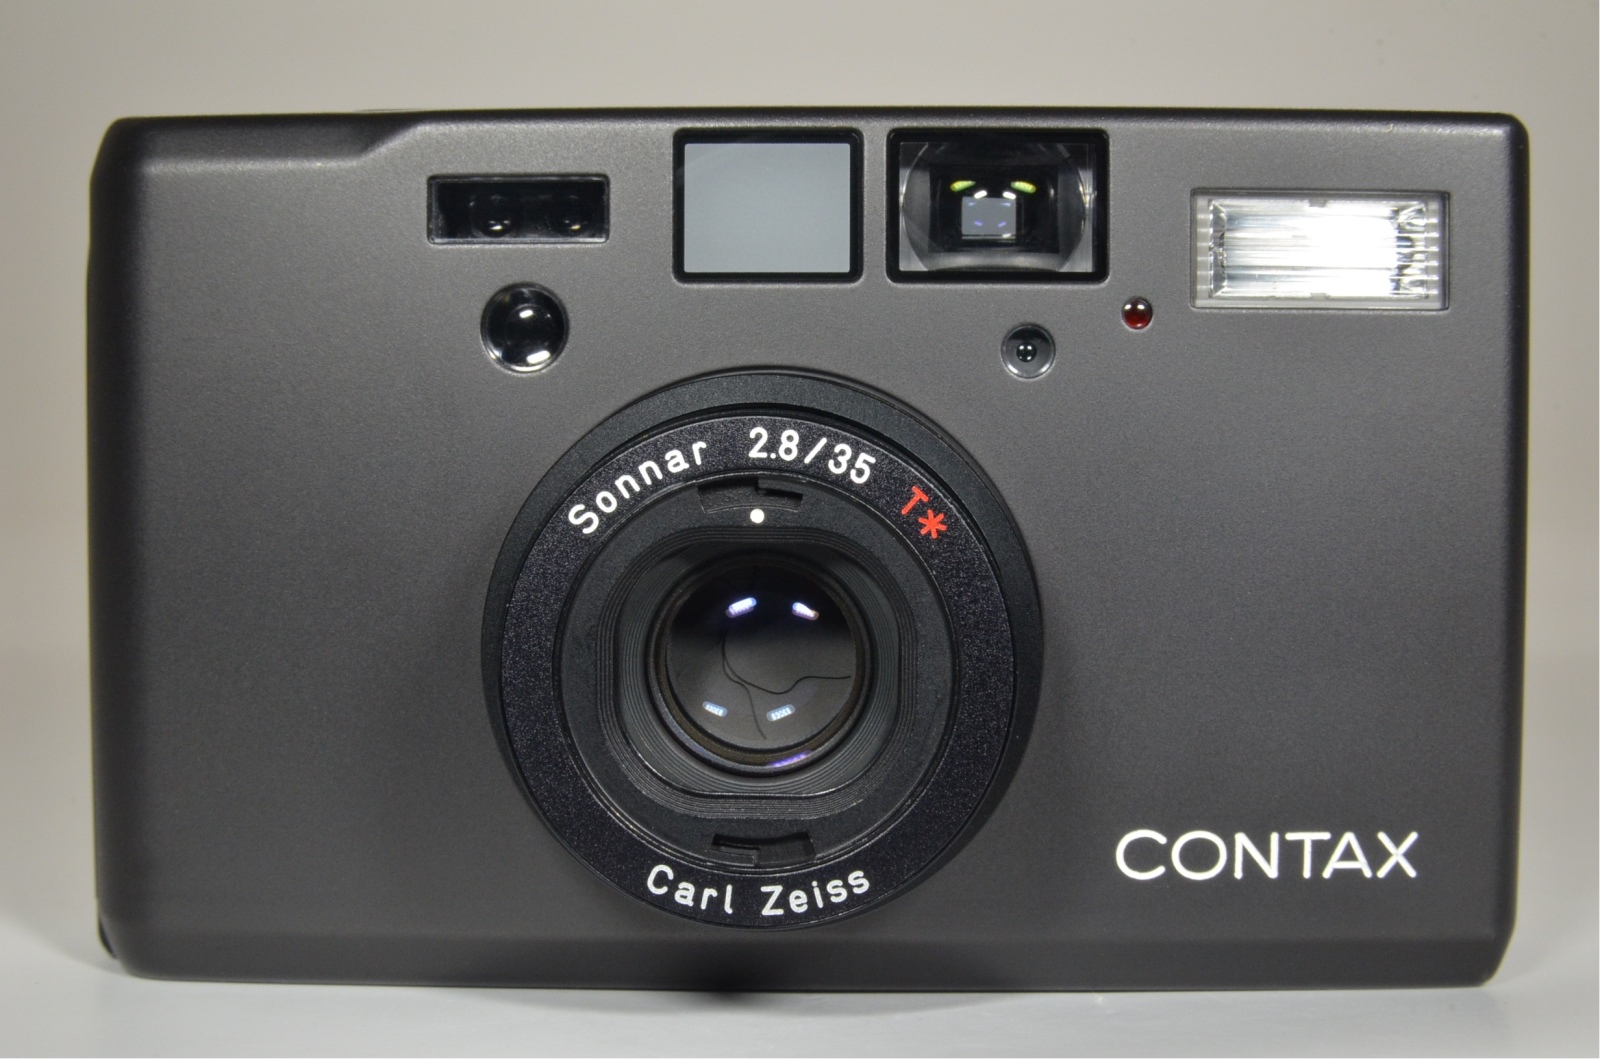 contax t3 black data back with metal hood and full leather case